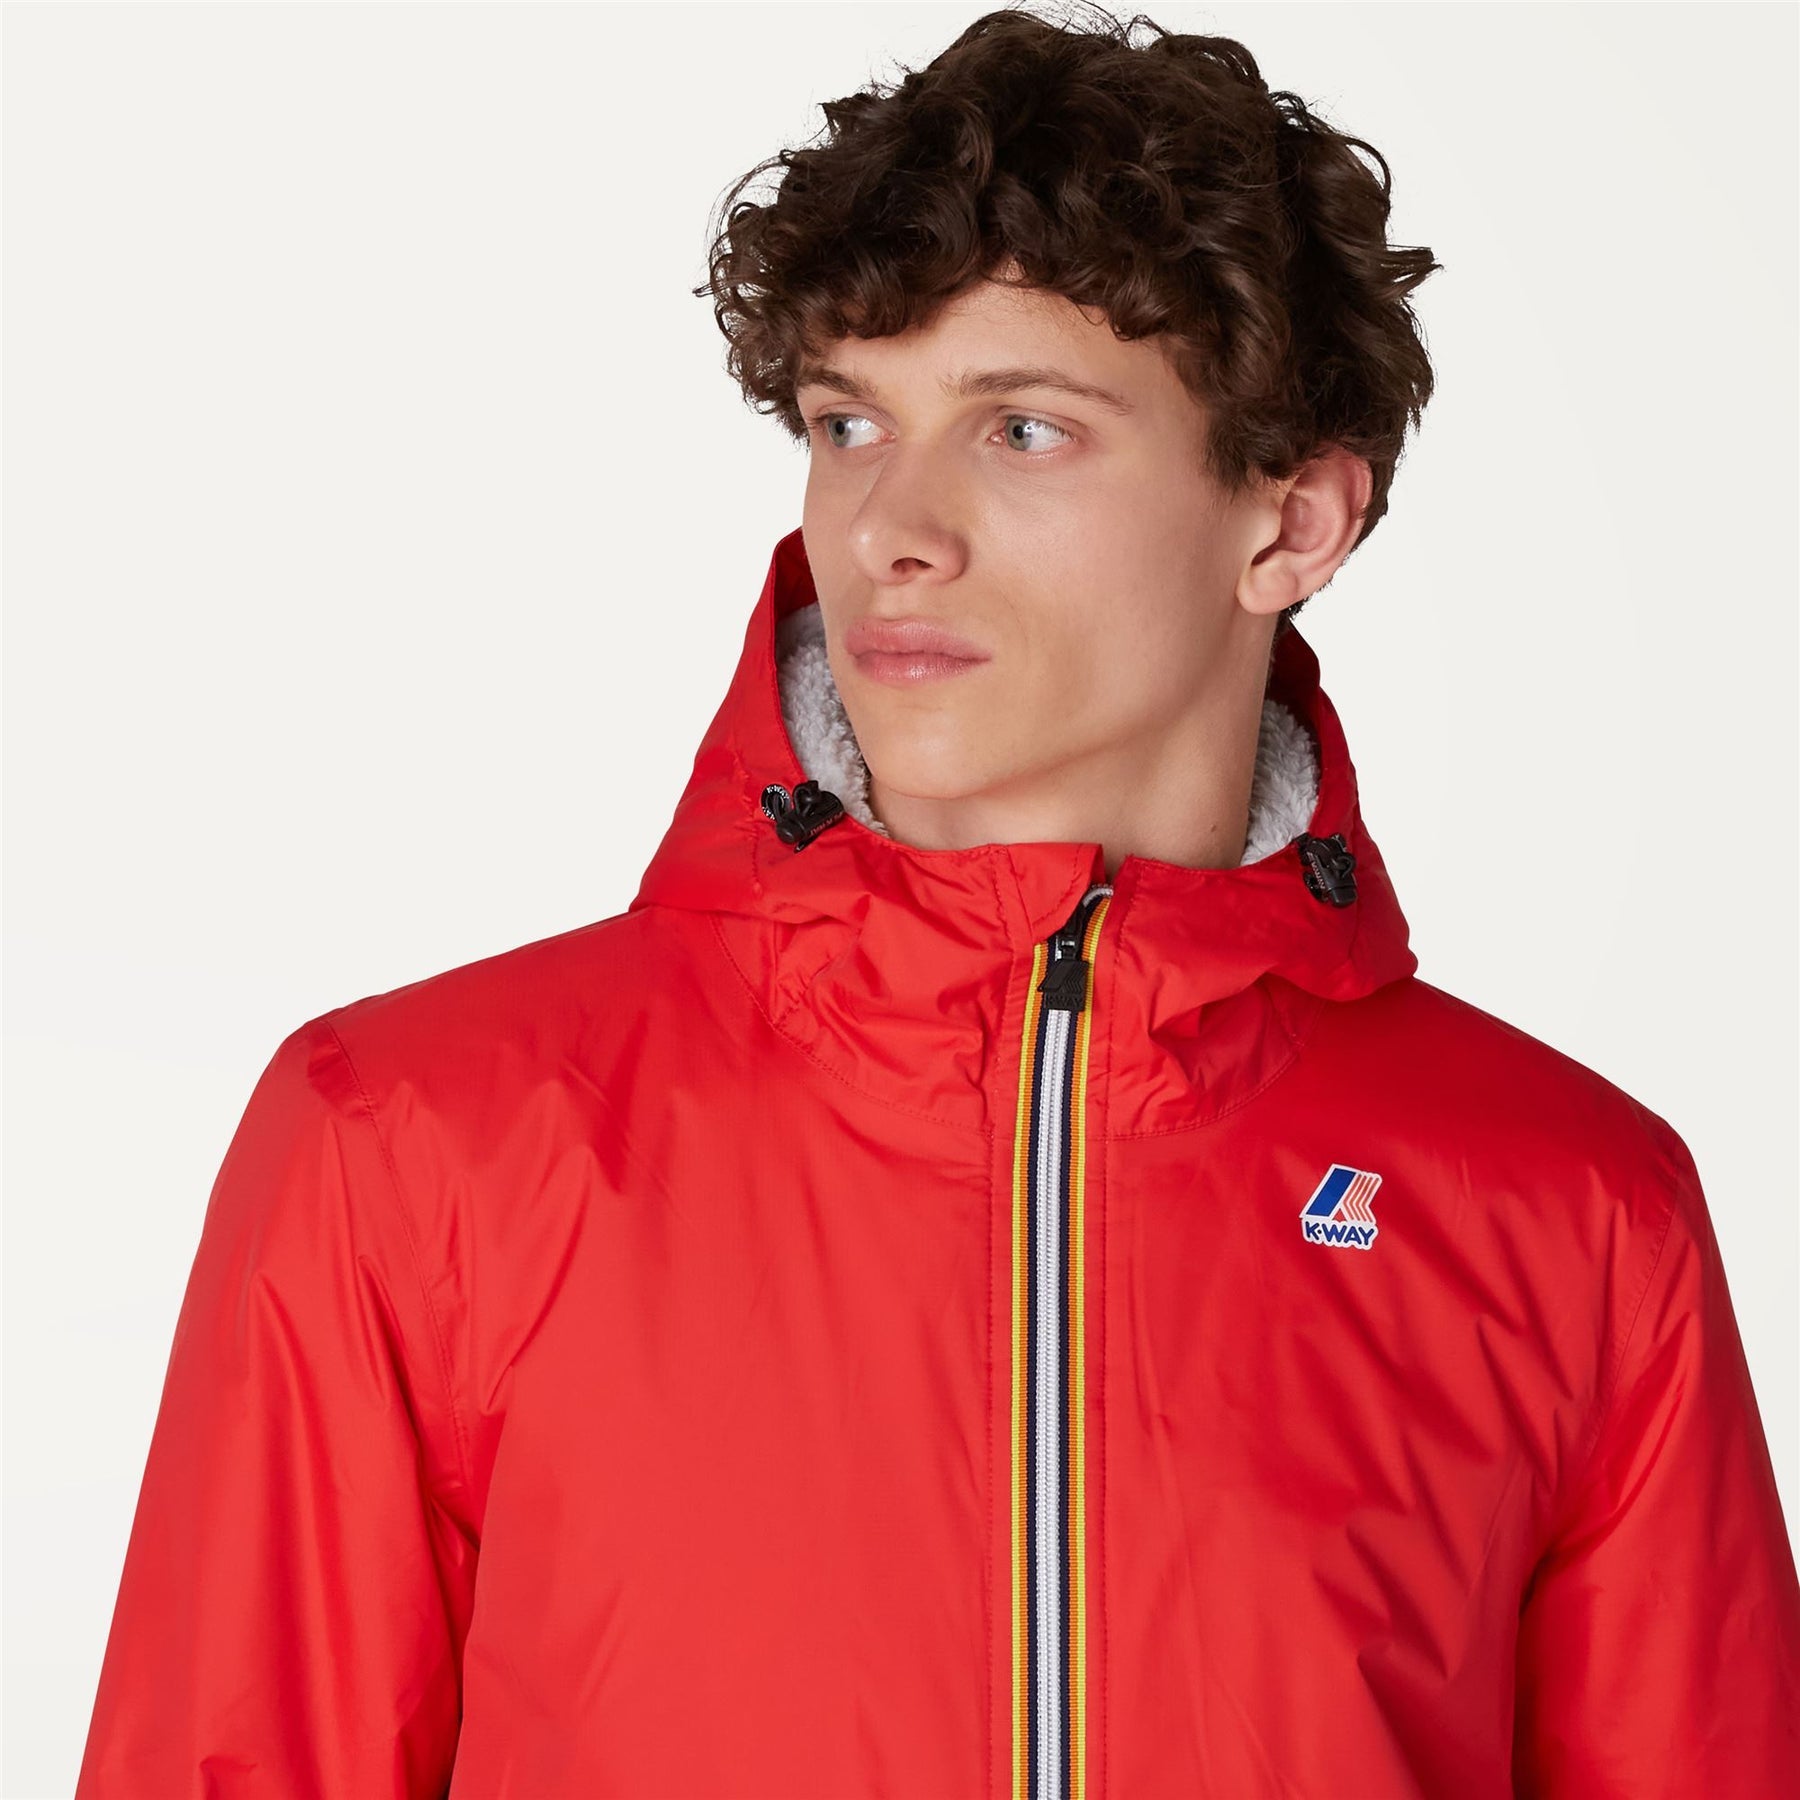 Claude Orsetto - Unisex Lined Full Zip Rain Jacket in Red